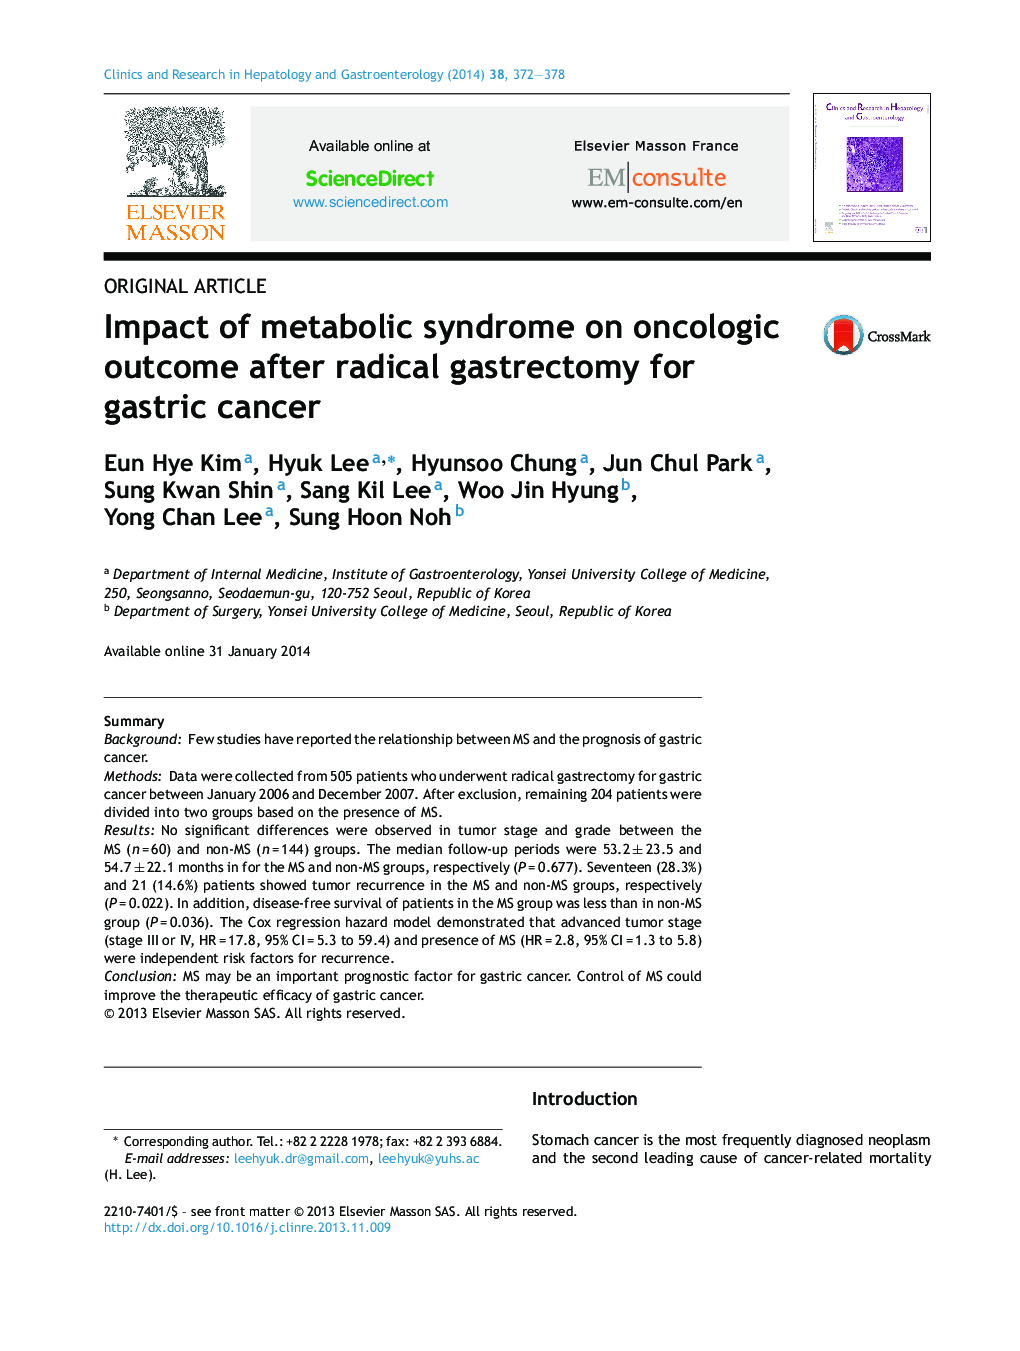 Impact of metabolic syndrome on oncologic outcome after radical gastrectomy for gastric cancer